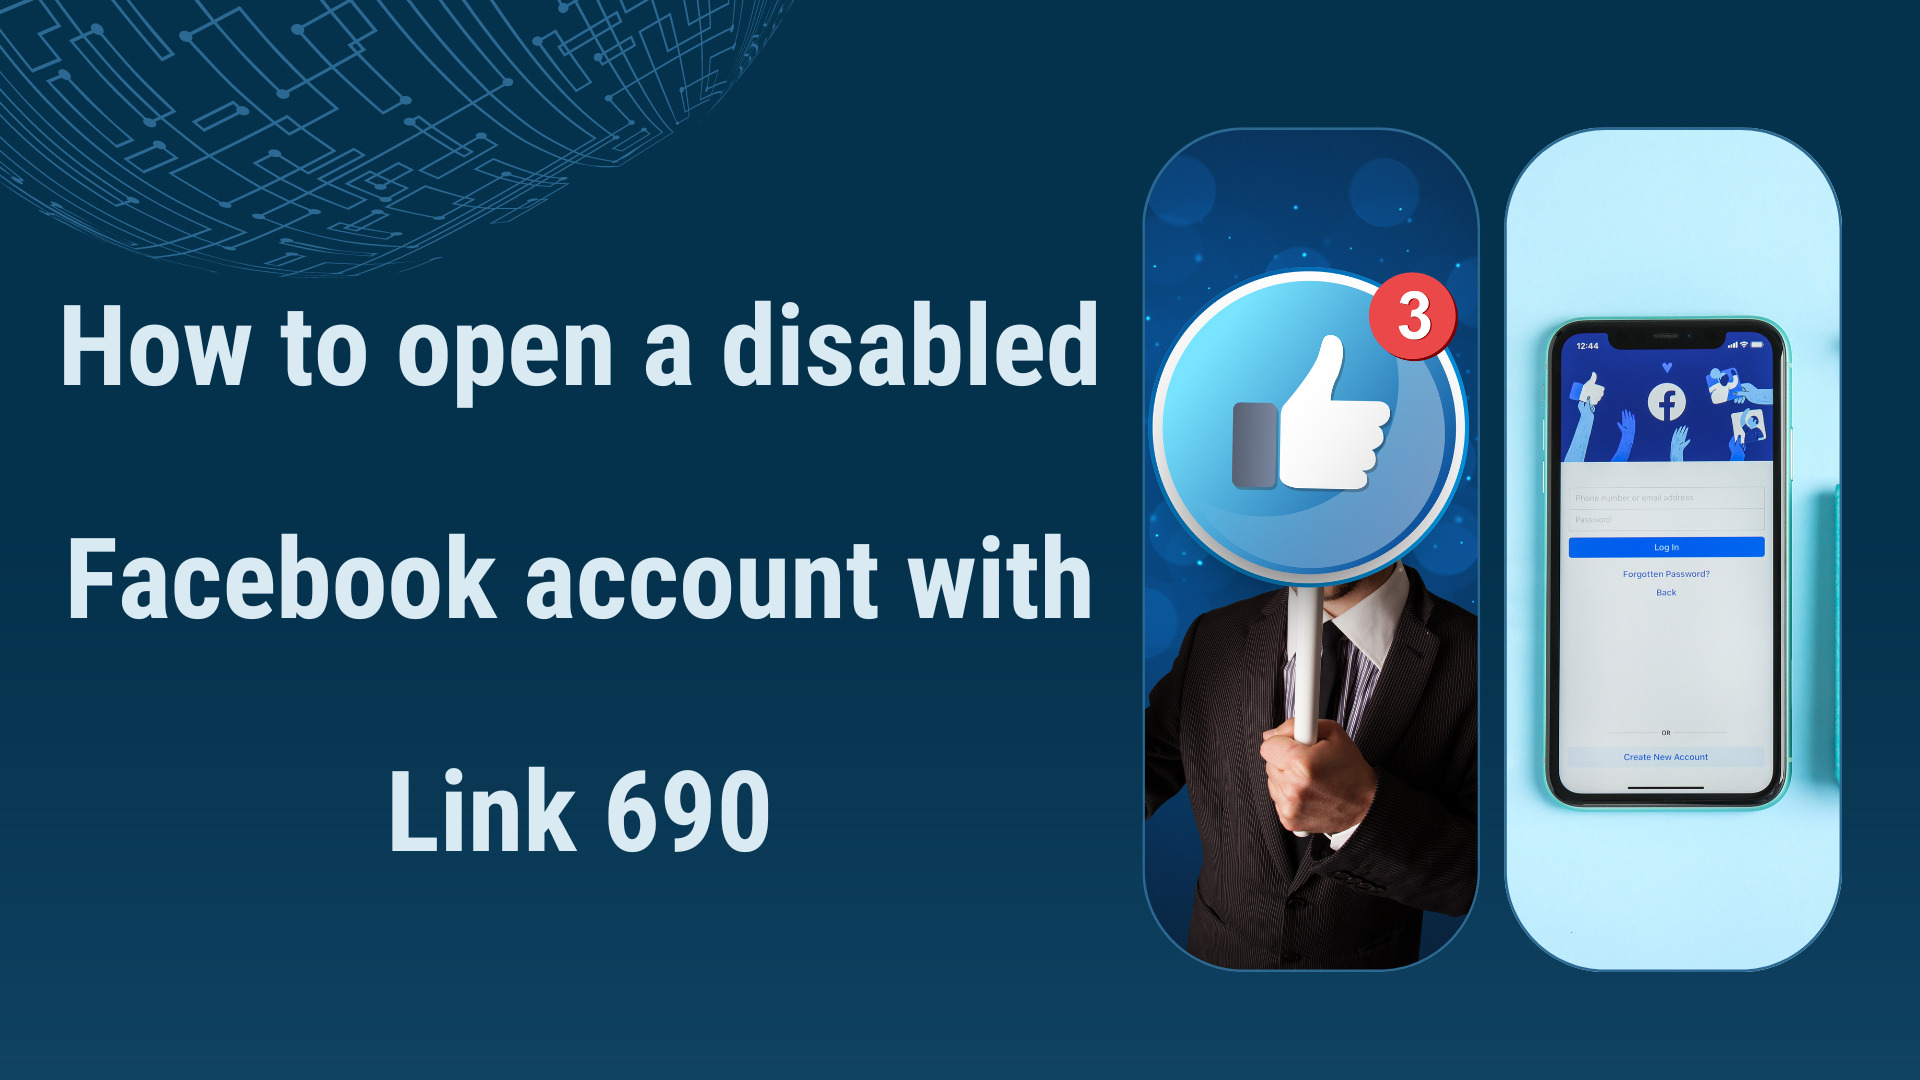 How to open a disabled Facebook account with Link 690